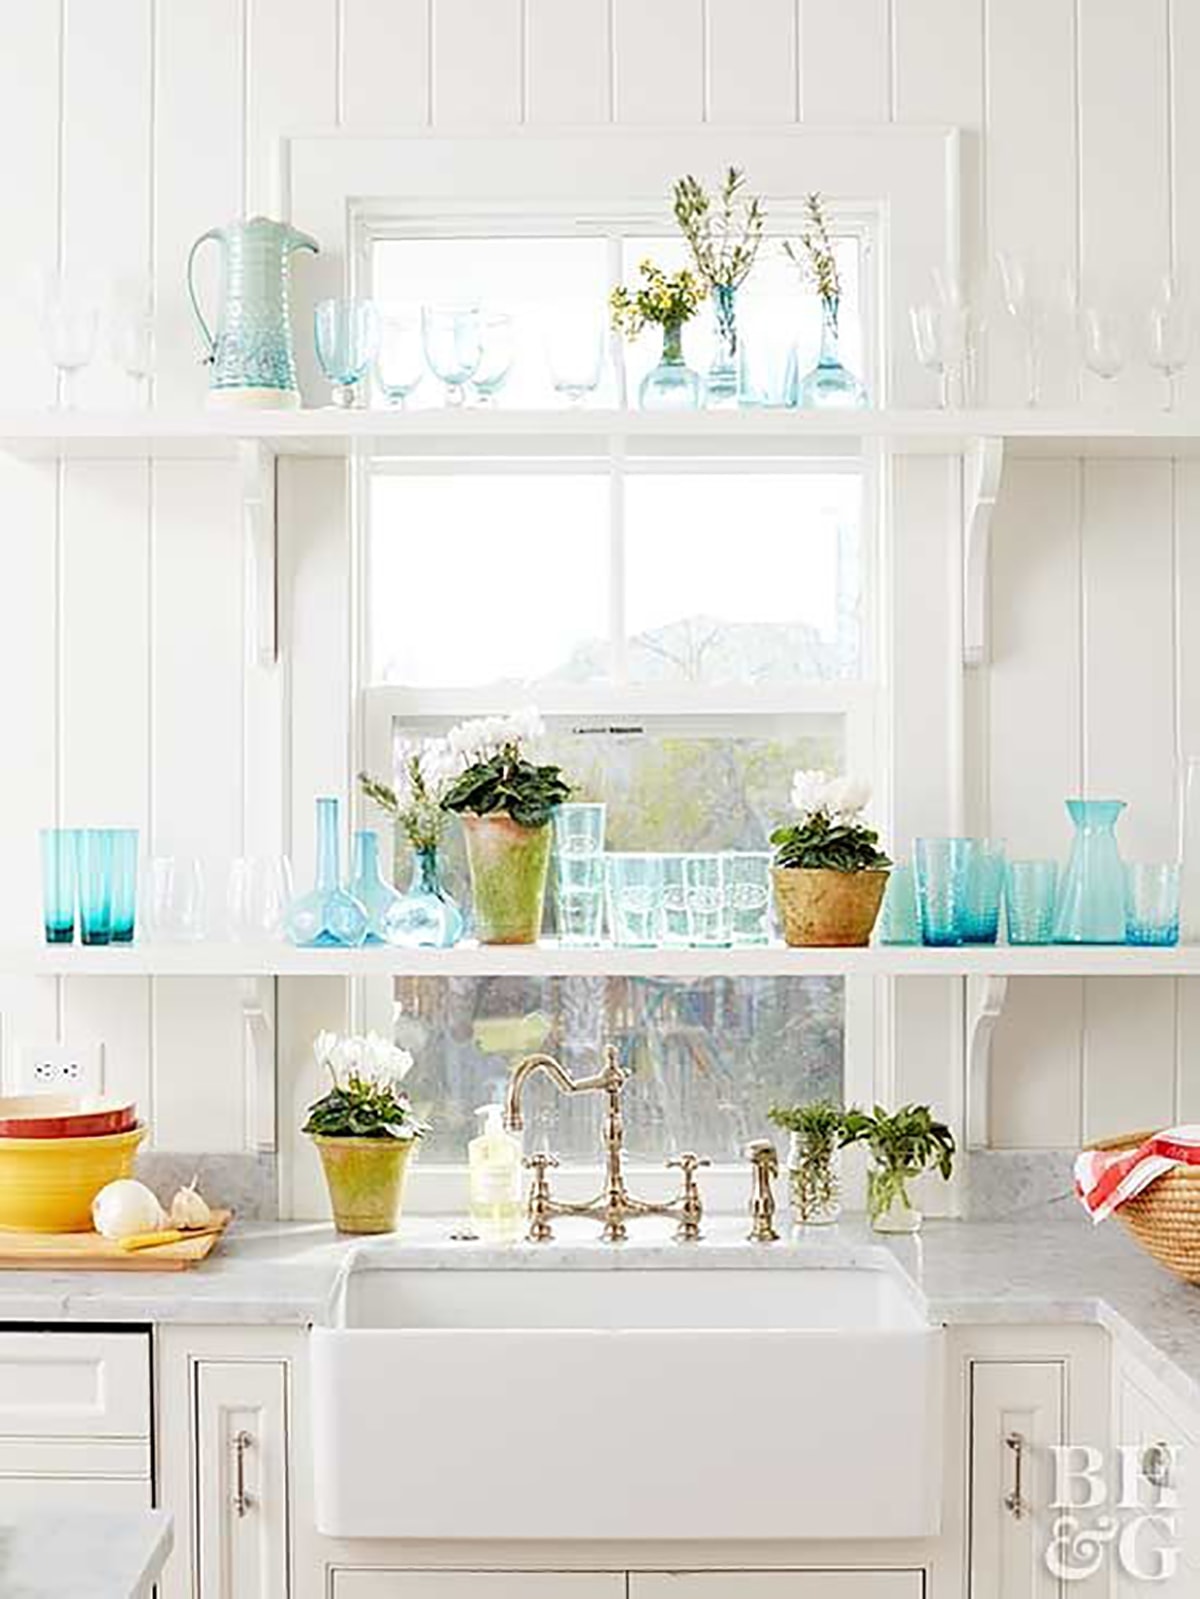 5 Kitchens That Inspire